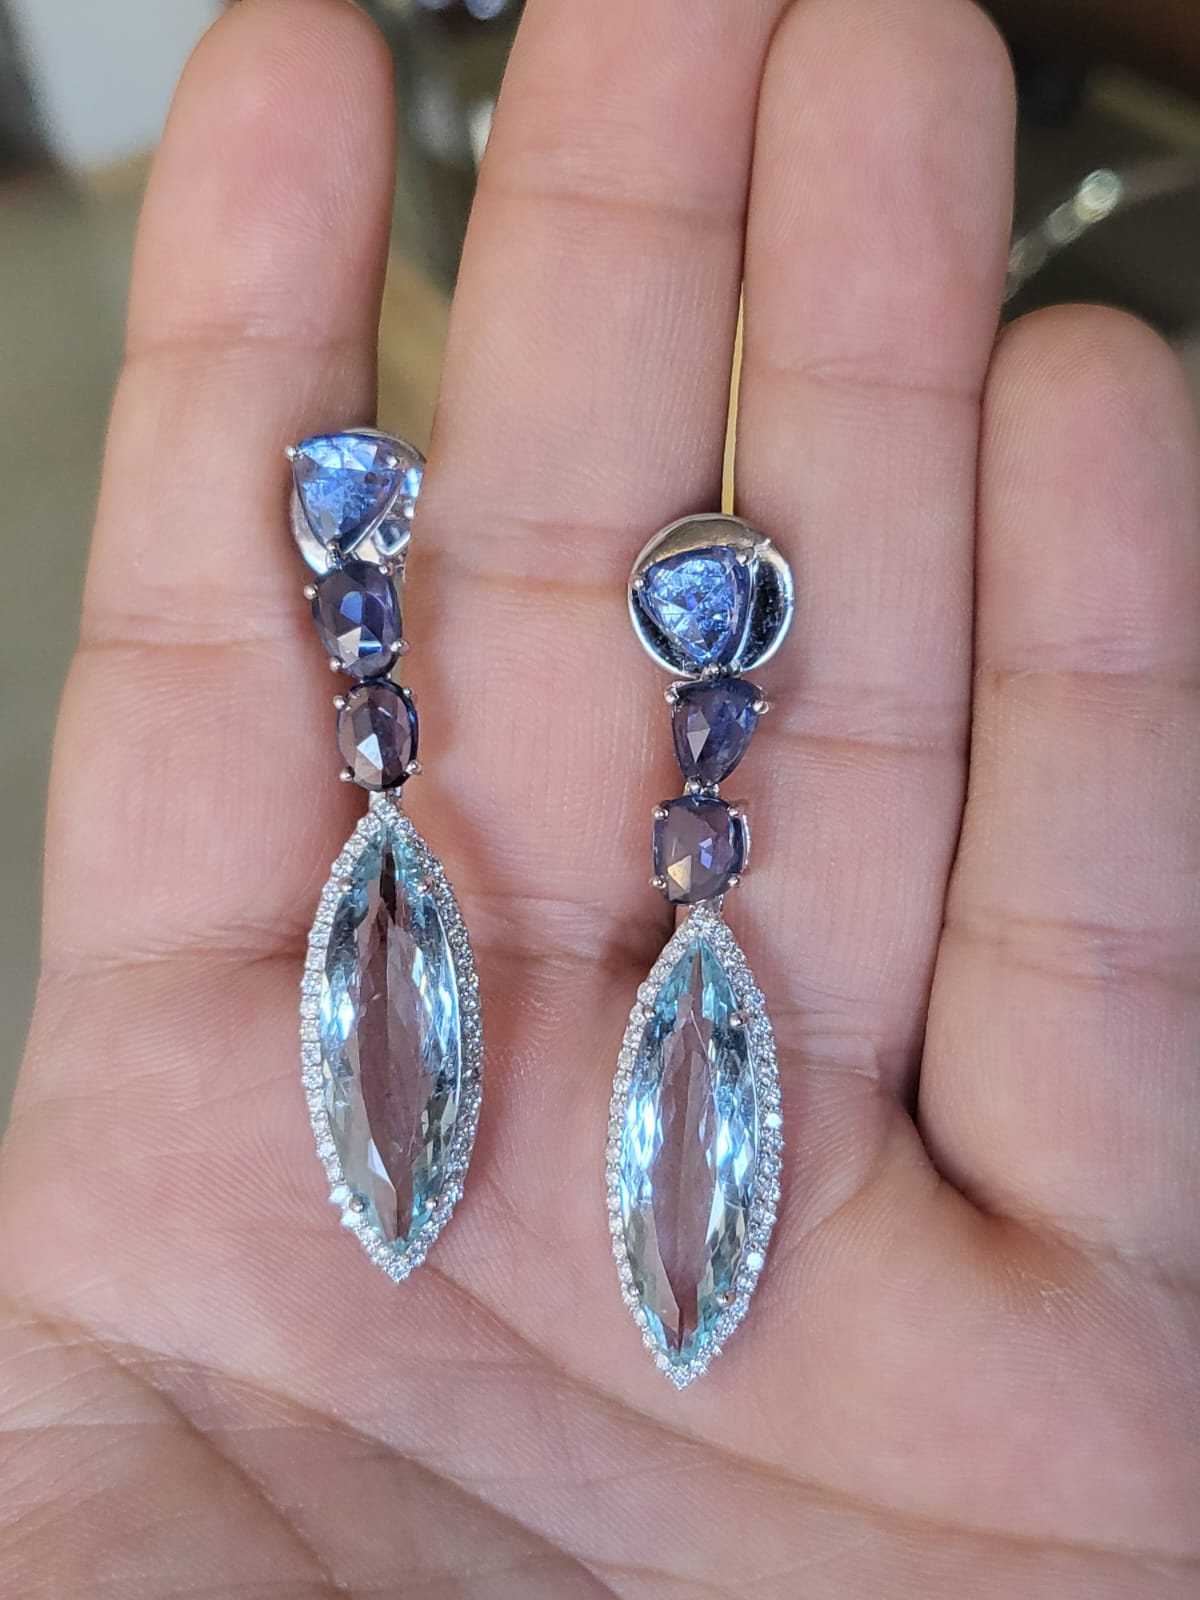 A very gorgeous and beautiful, Aquamarine & Blue Sapphires Dangle / Drop Earrings set in 18K White Gold & Diamonds. The weight of the marquise shaped Aquamarines is 11.54 carats. The weight of the Blue Sapphire Rose Cuts 5.59 carats. The Blue